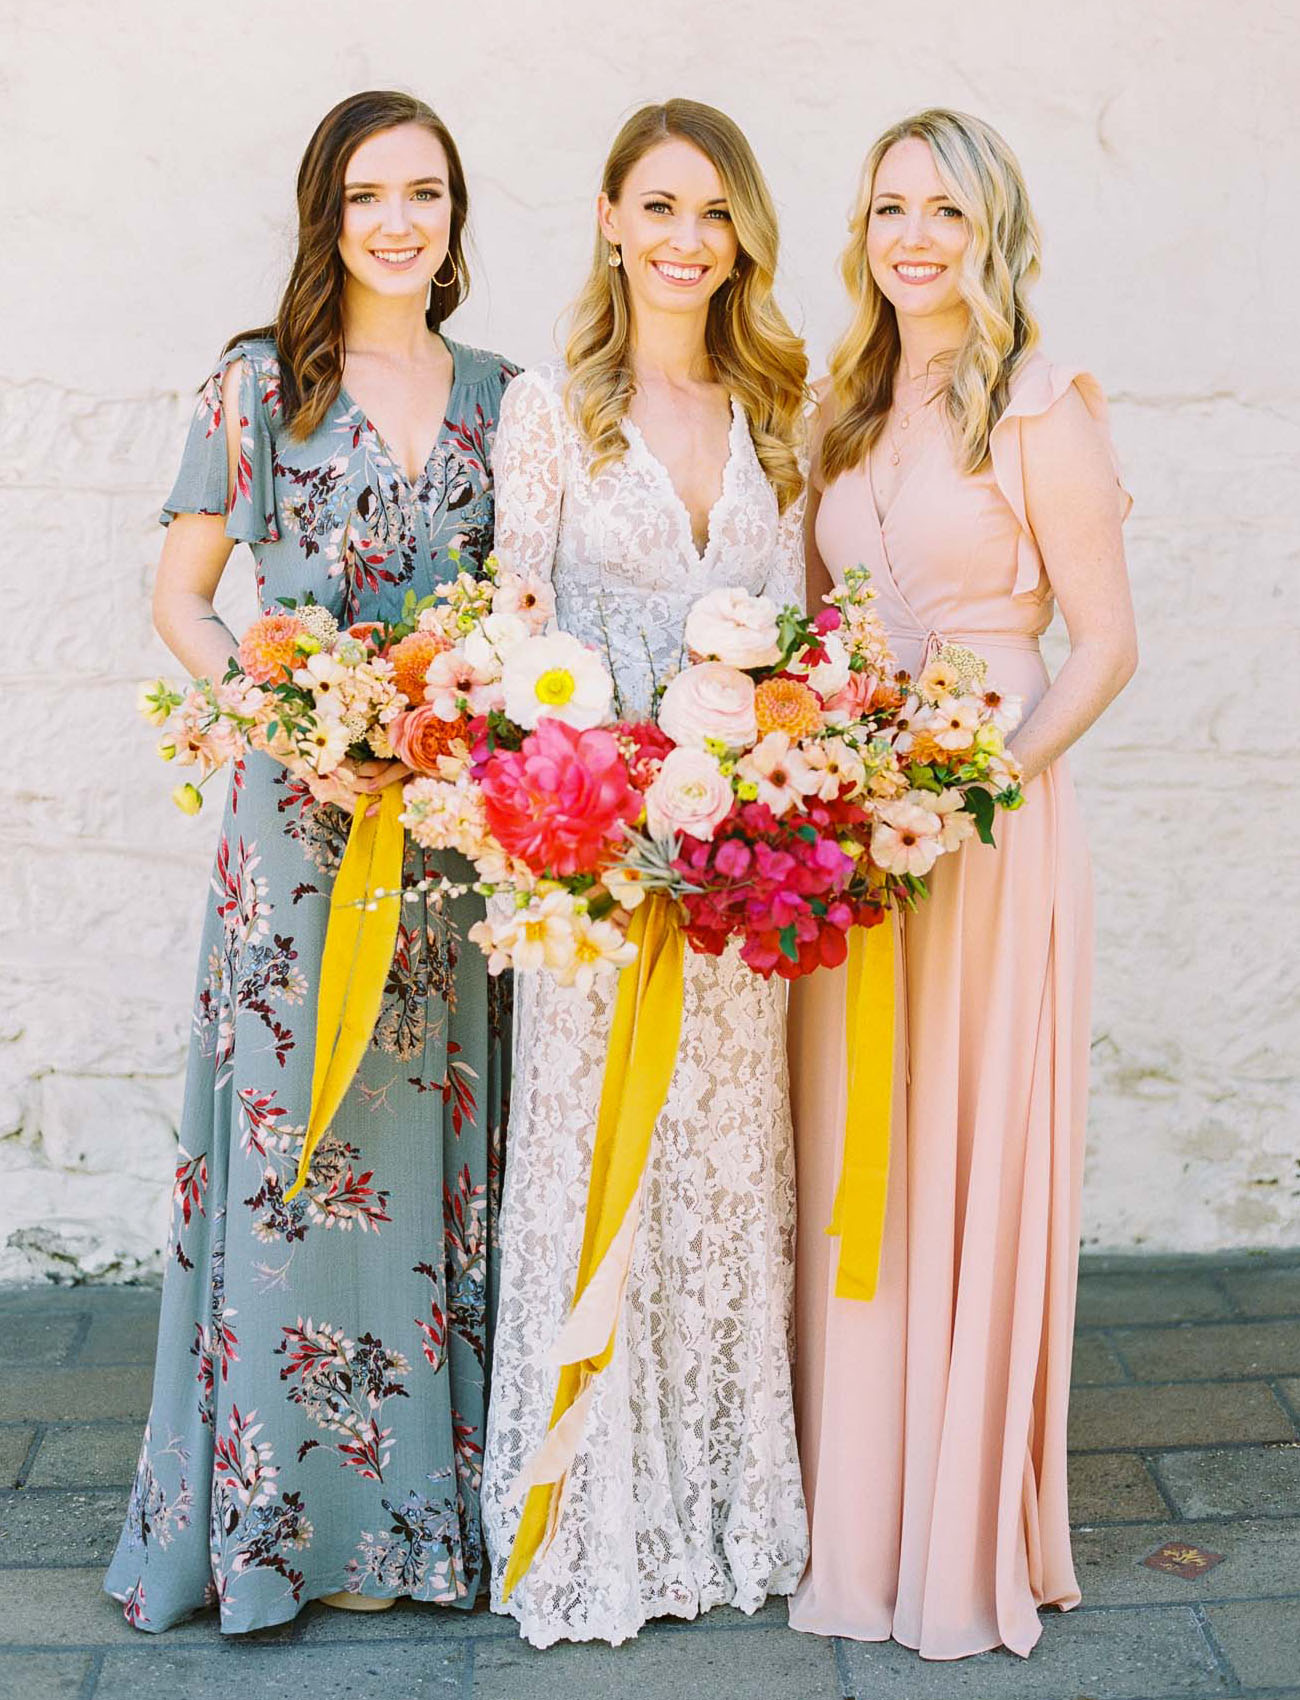 The bridesmaids were wearing mismatching maxi wrap dresses